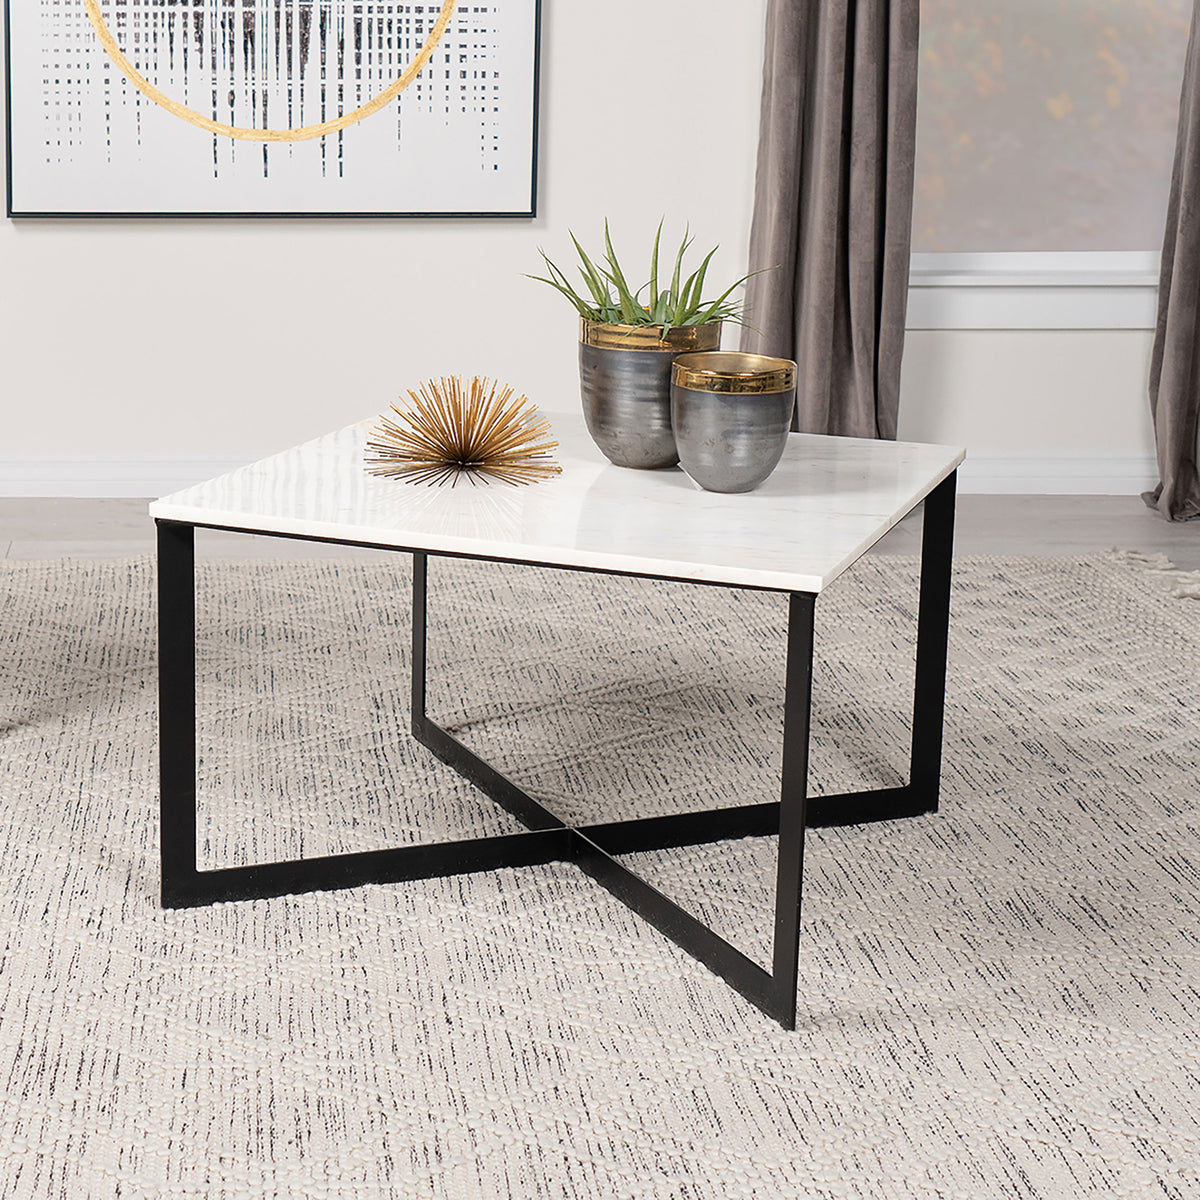 Tobin Square Marble Top Coffee Table White and Black  Las Vegas Furniture Stores